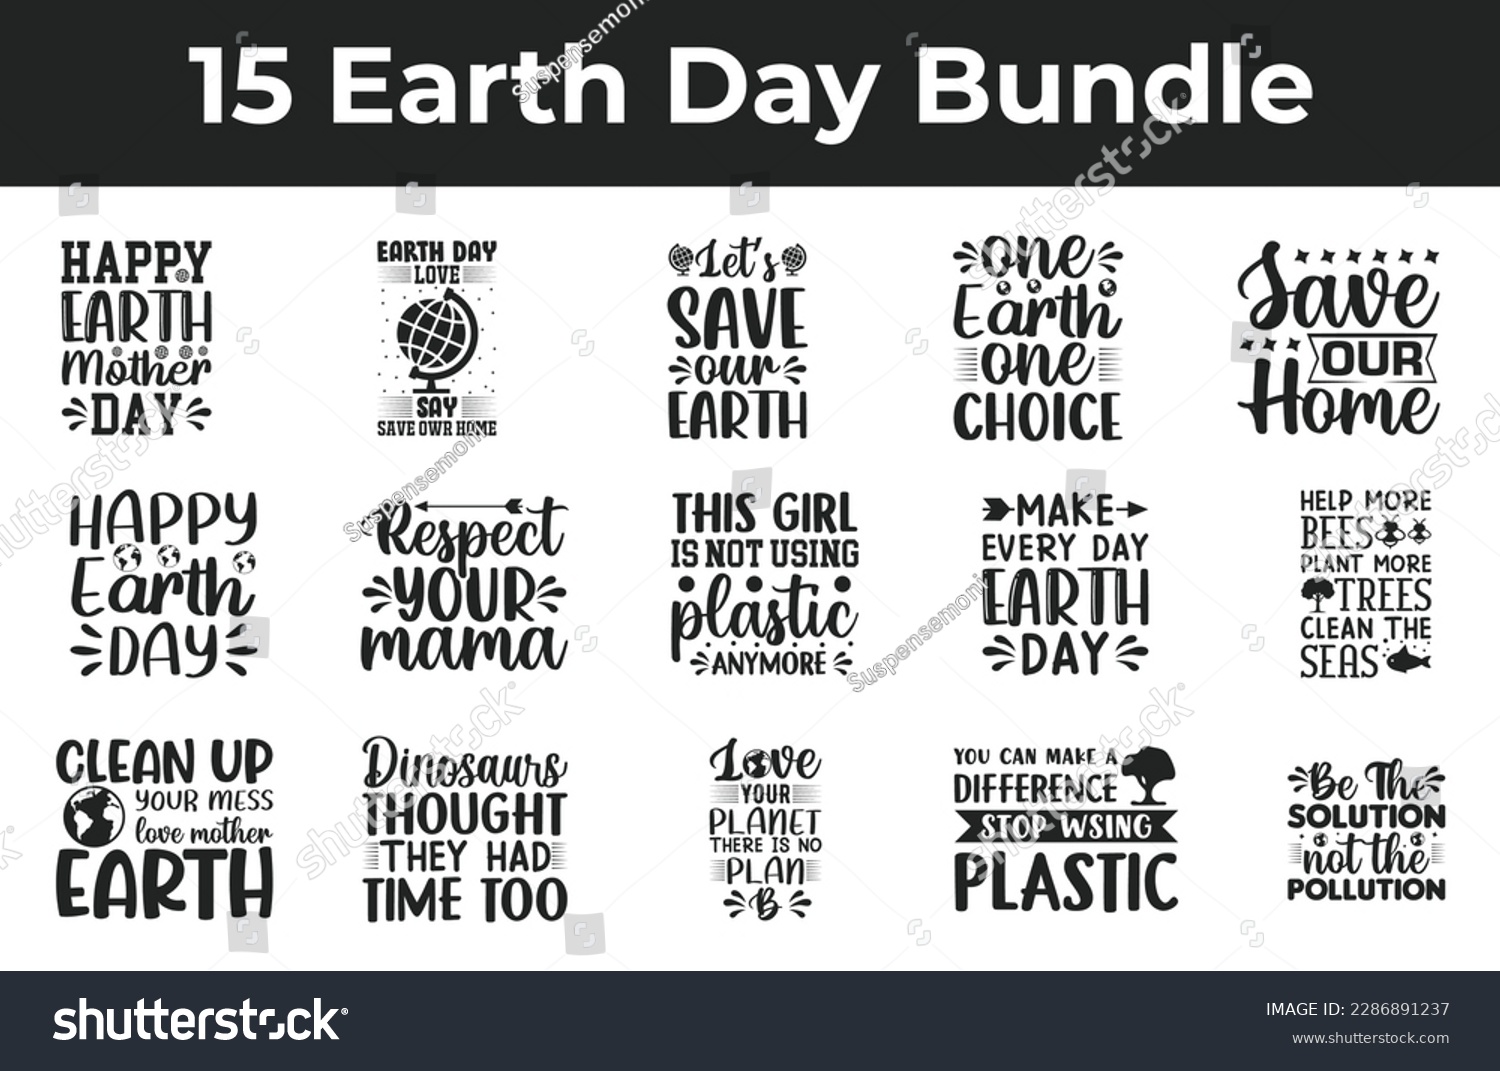 SVG of Earth Day Svg Bundle vector t-shirt design. Earth day t-shirt design. Can be used for Print mugs, sticker designs, greeting cards, posters, bags, and t-shirts svg